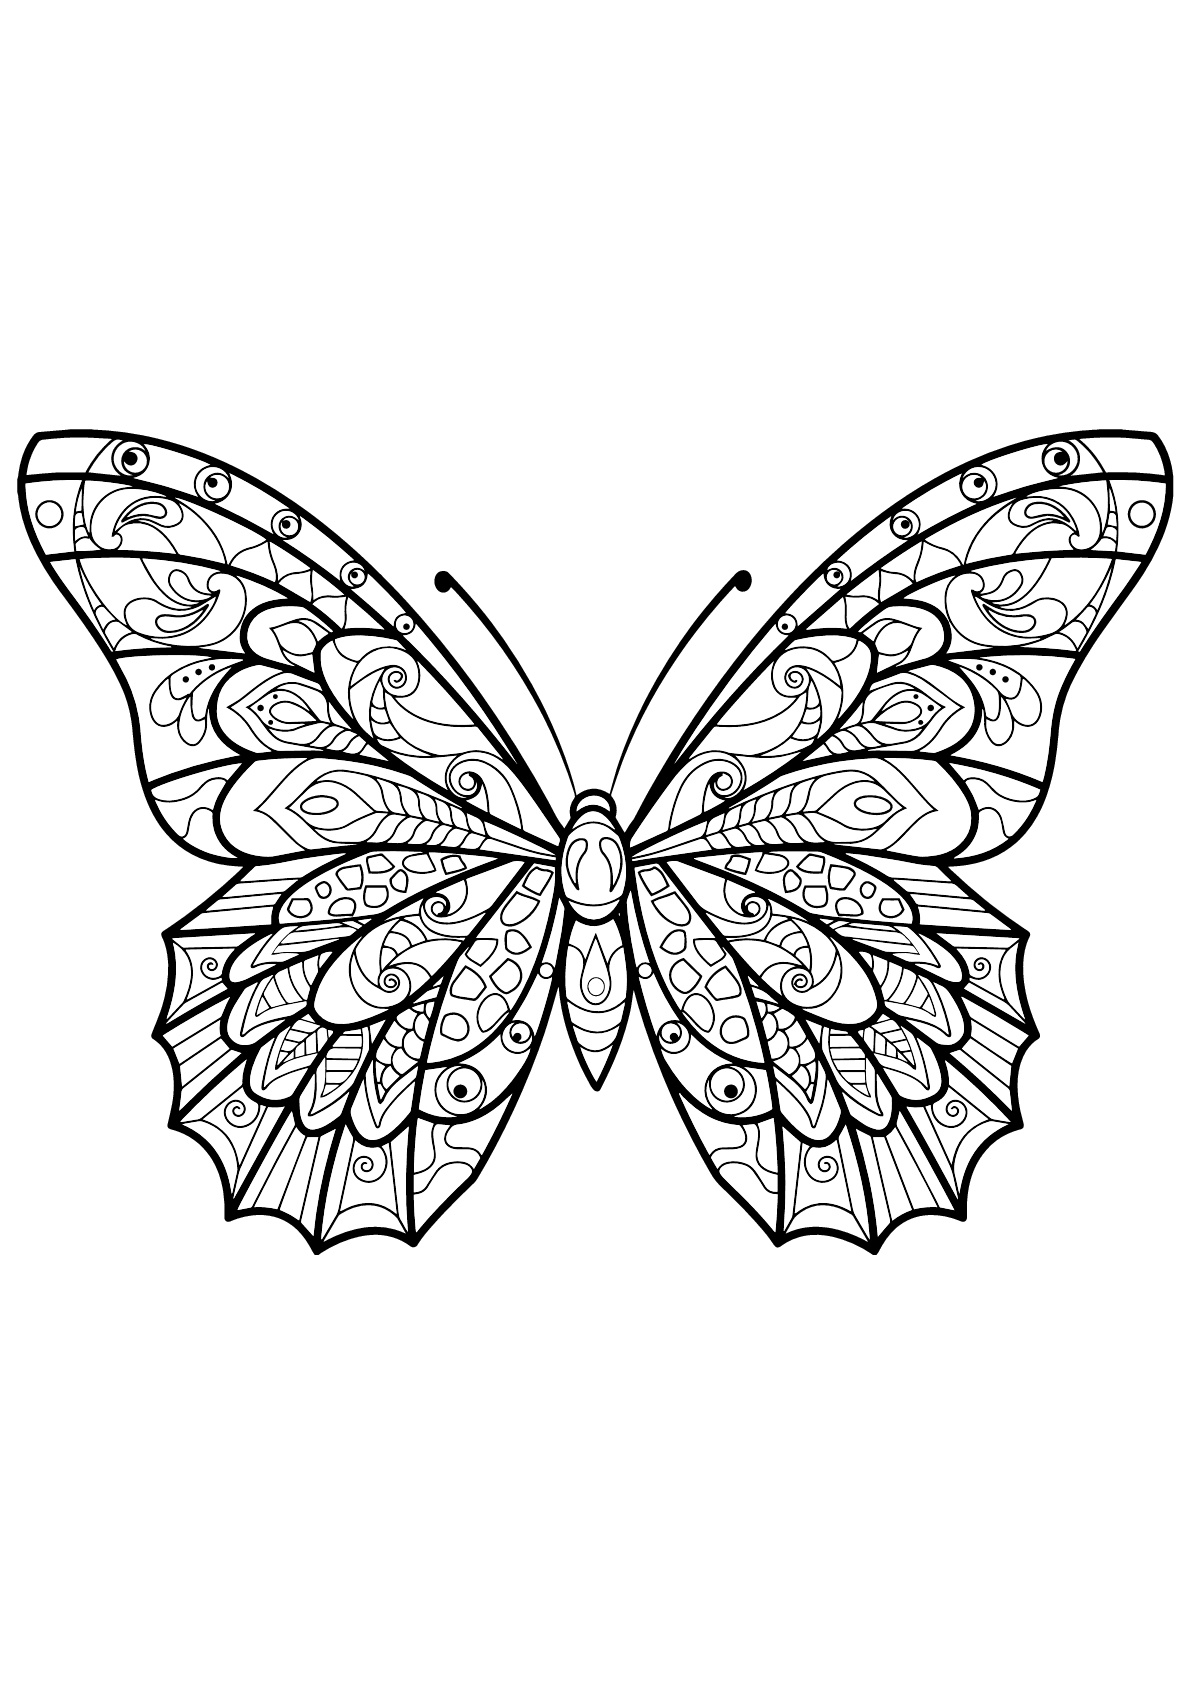 Butterfly beautiful patterns 3 - Butterflies &amp; insects Adult Coloring Pages